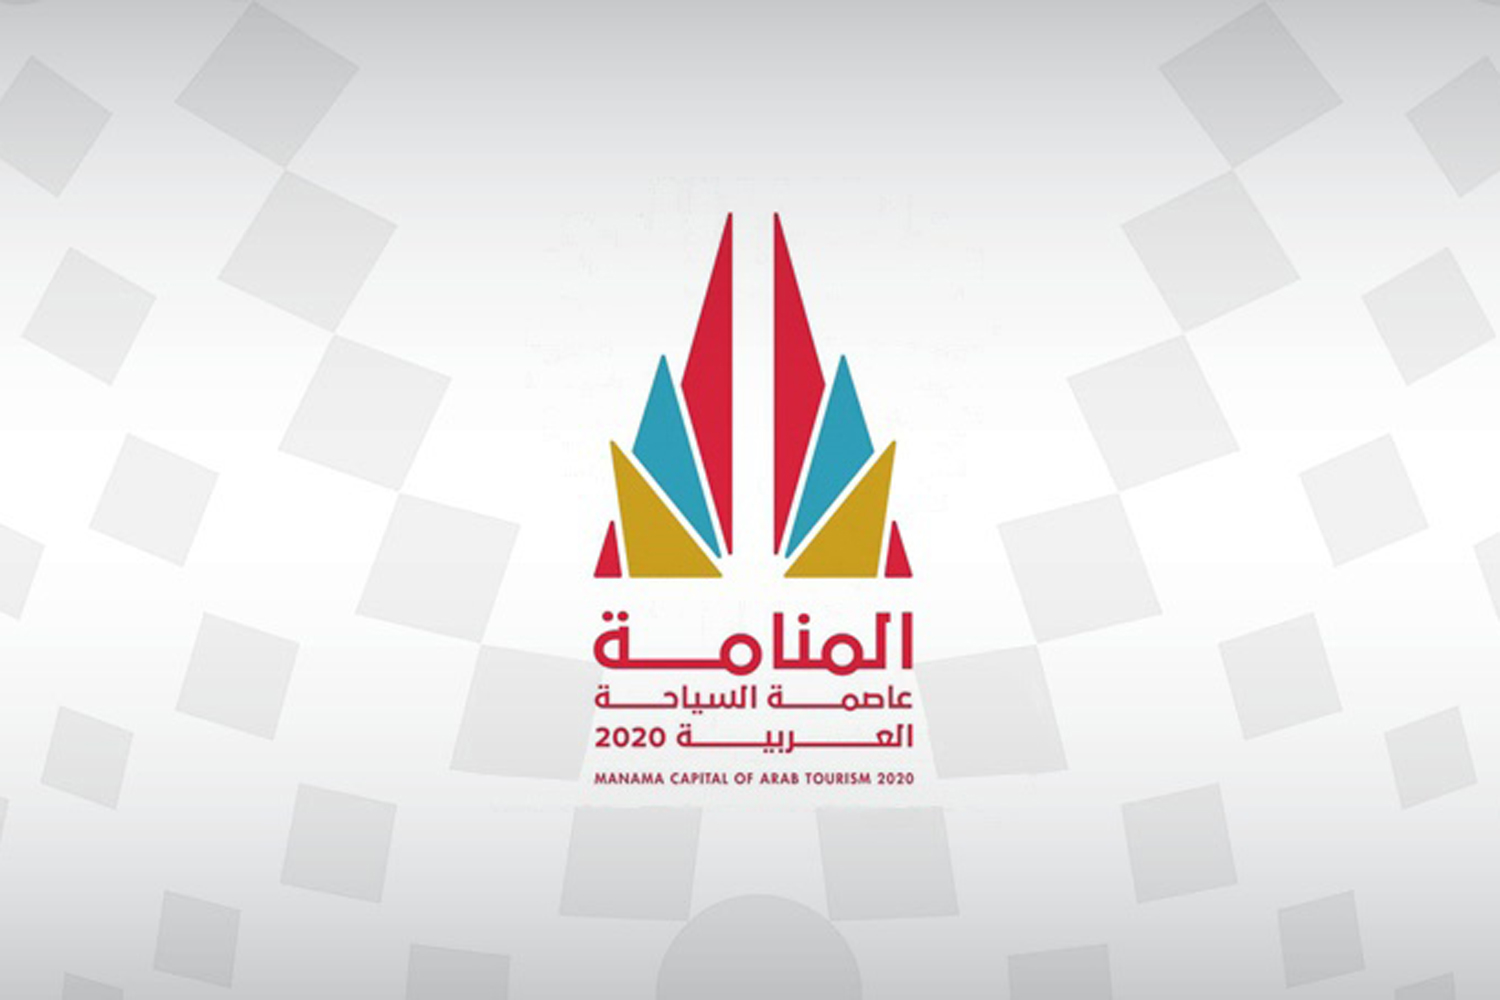 Bahrain’s tourism board unveils new logo and identity | News | Time Out